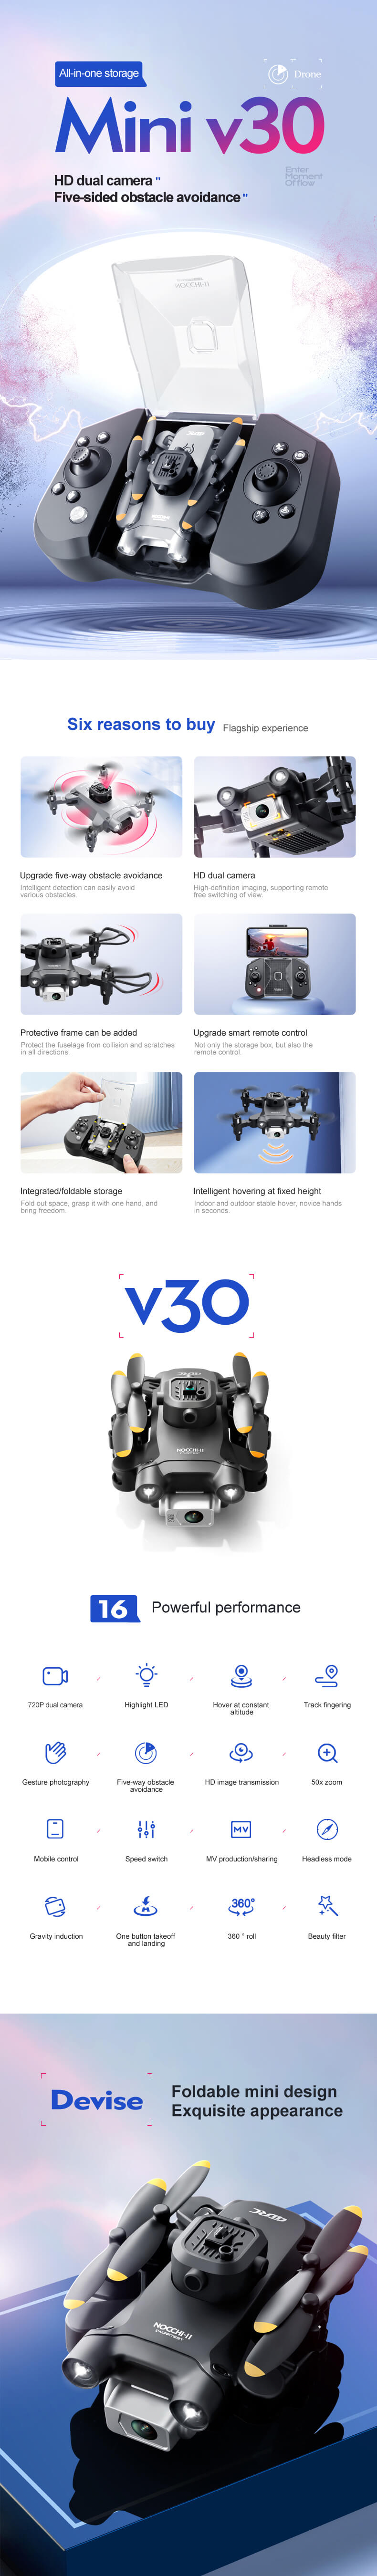 4D-V30 mini drone obstacle avoidance with HD camera